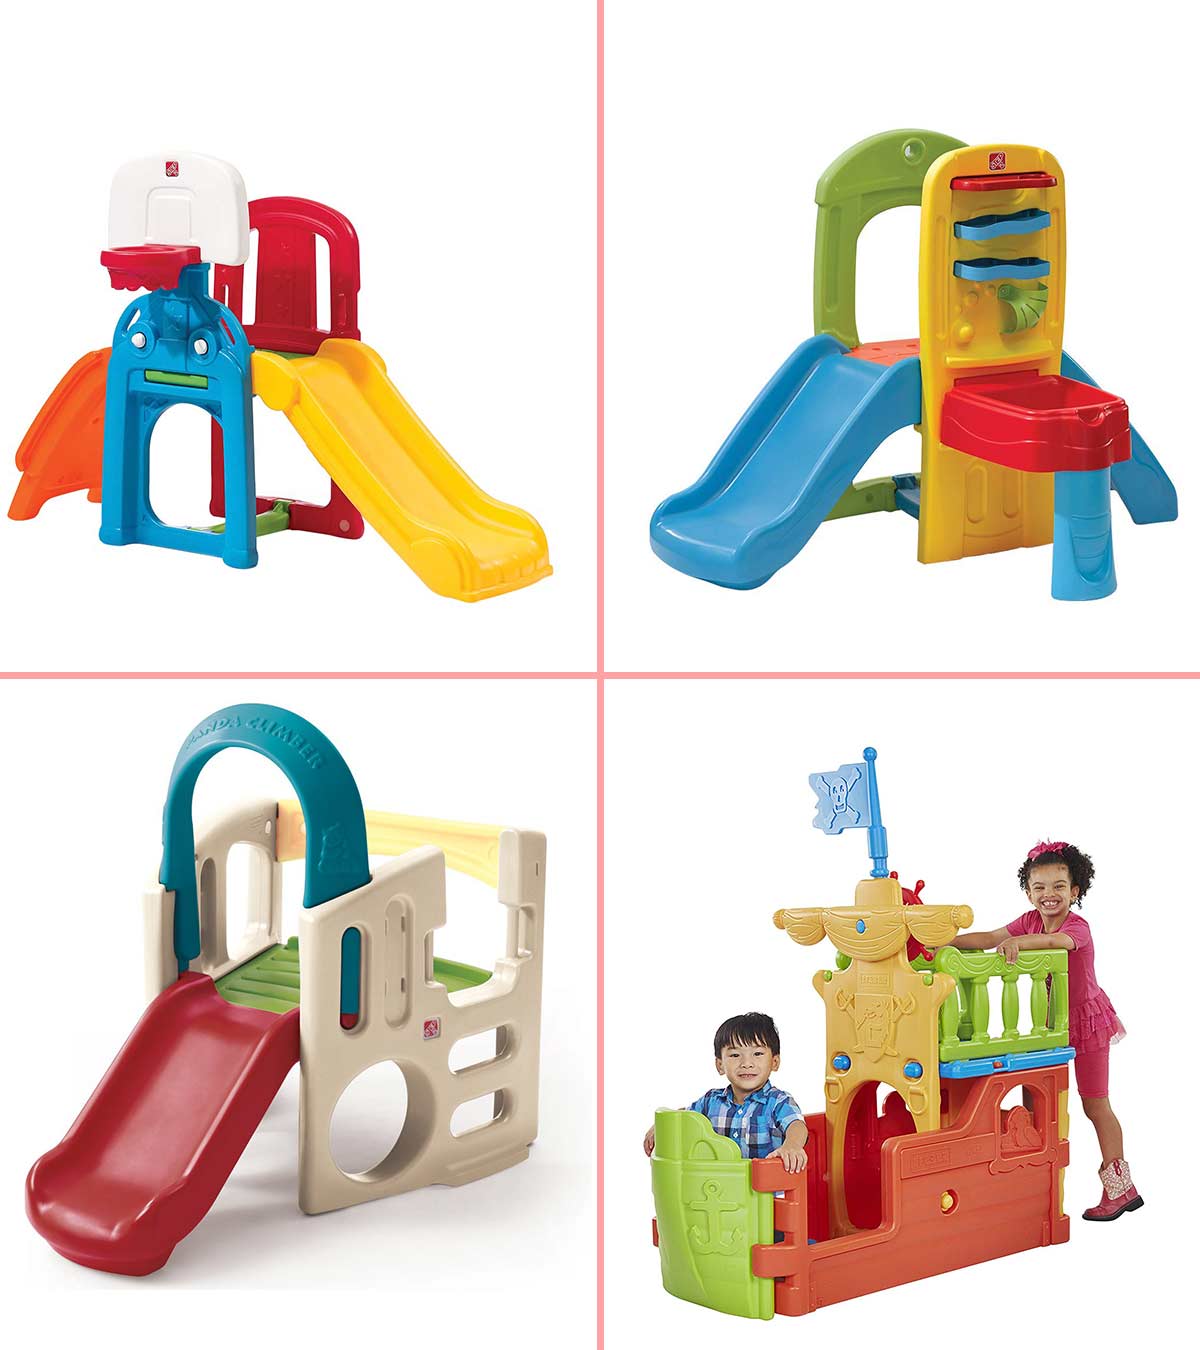 best playsets for toddlers